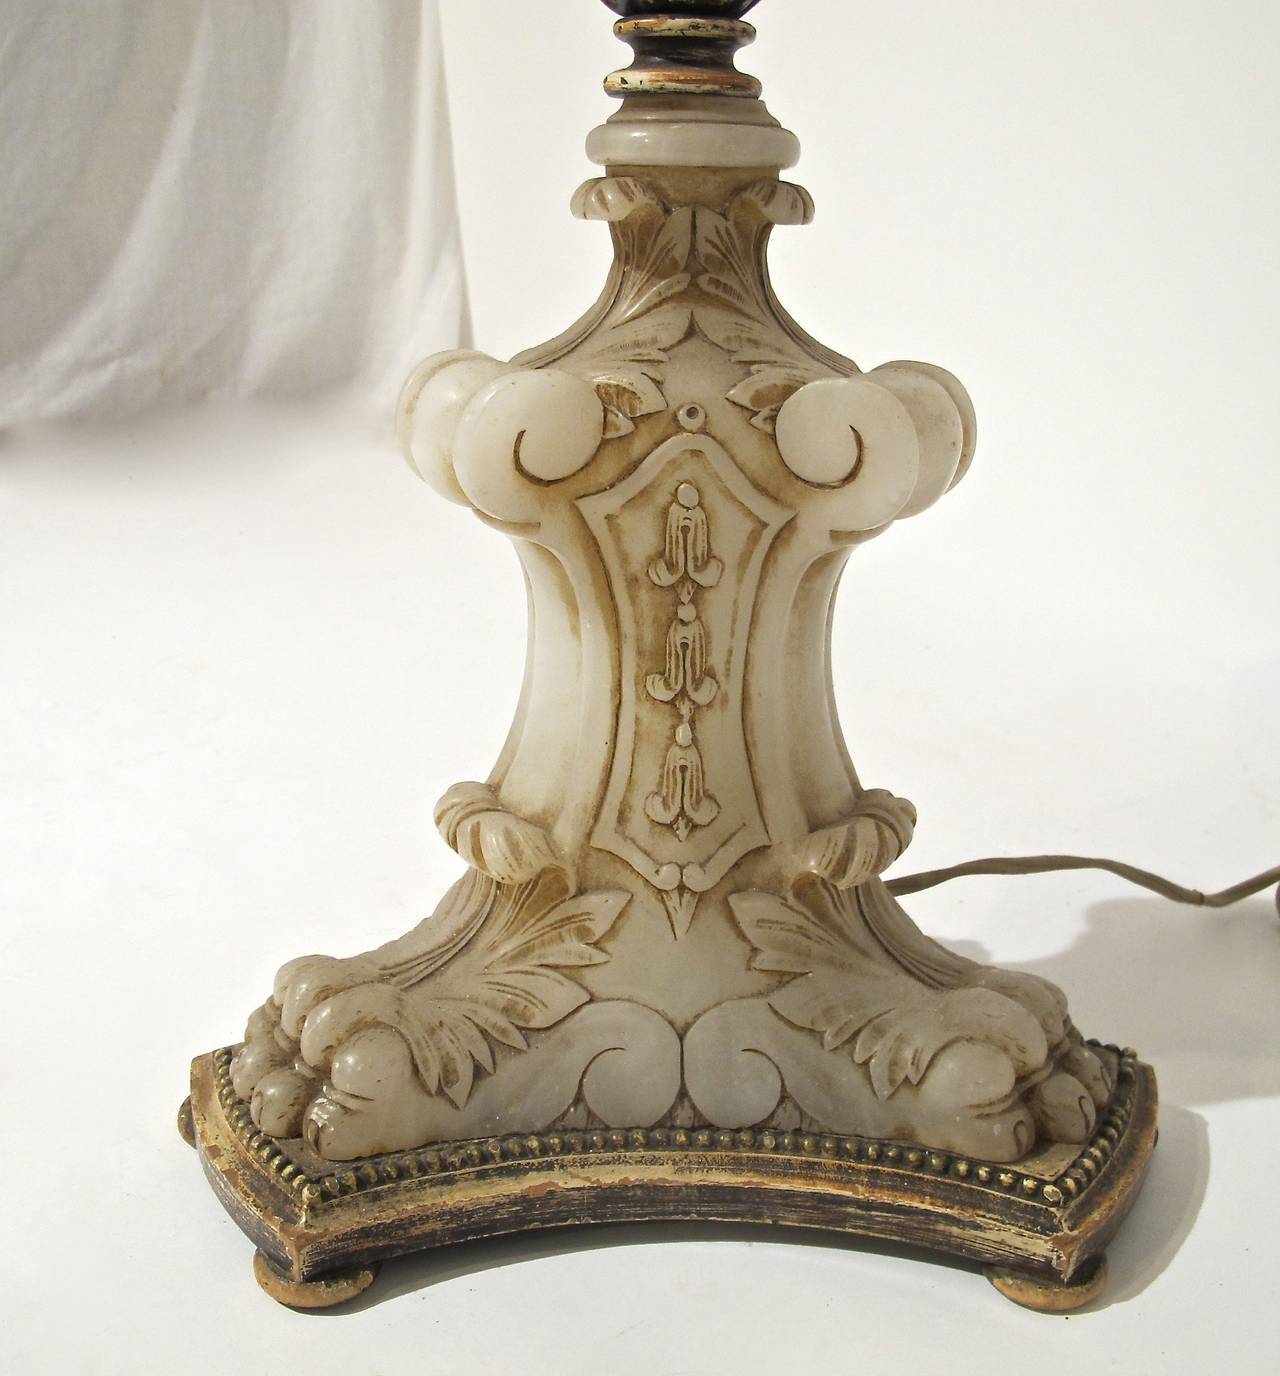 A very unusual and tall floor lamp with exceptional mica shade. Painted wrought iron with wonderful floral detail, great finial, and interesting hand carved alabaster base. Newly re-wired.